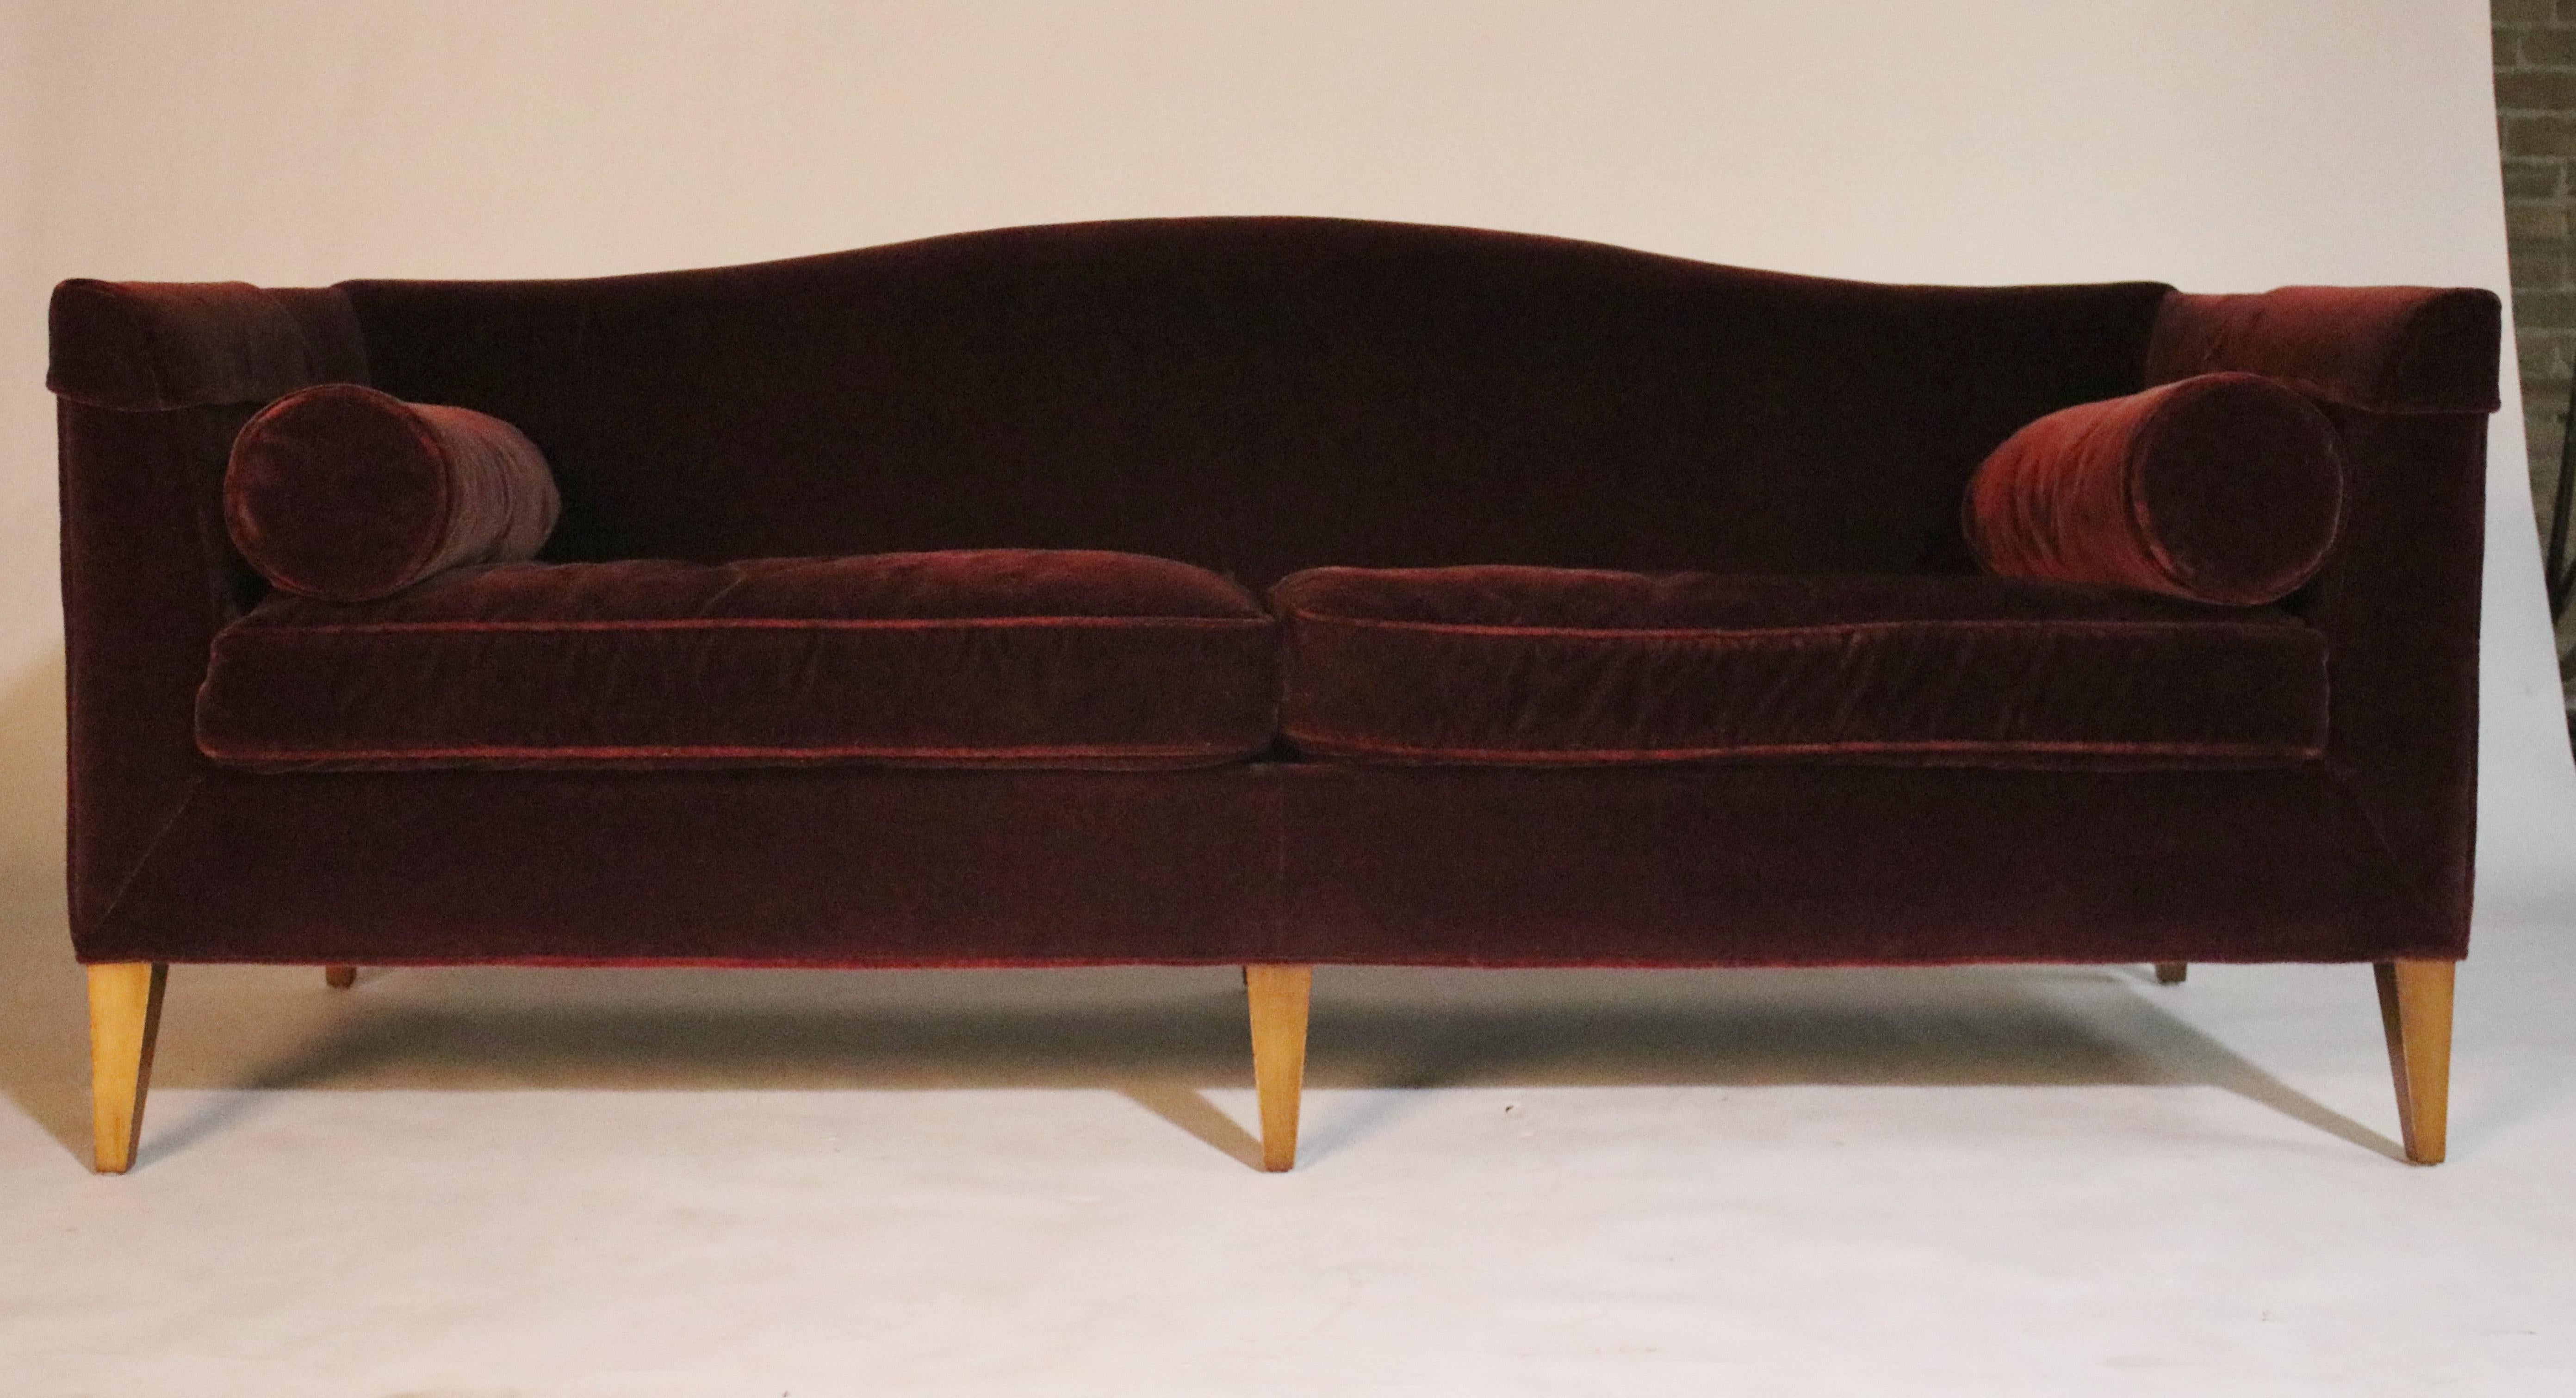 Baker archetype camelback sofa in deep red merlot mohair with a butter knife arm and symmetric bolsters. Loose seat. Square tapered maple wood legs. Model #2386-80, labelled. Retails $16,230.